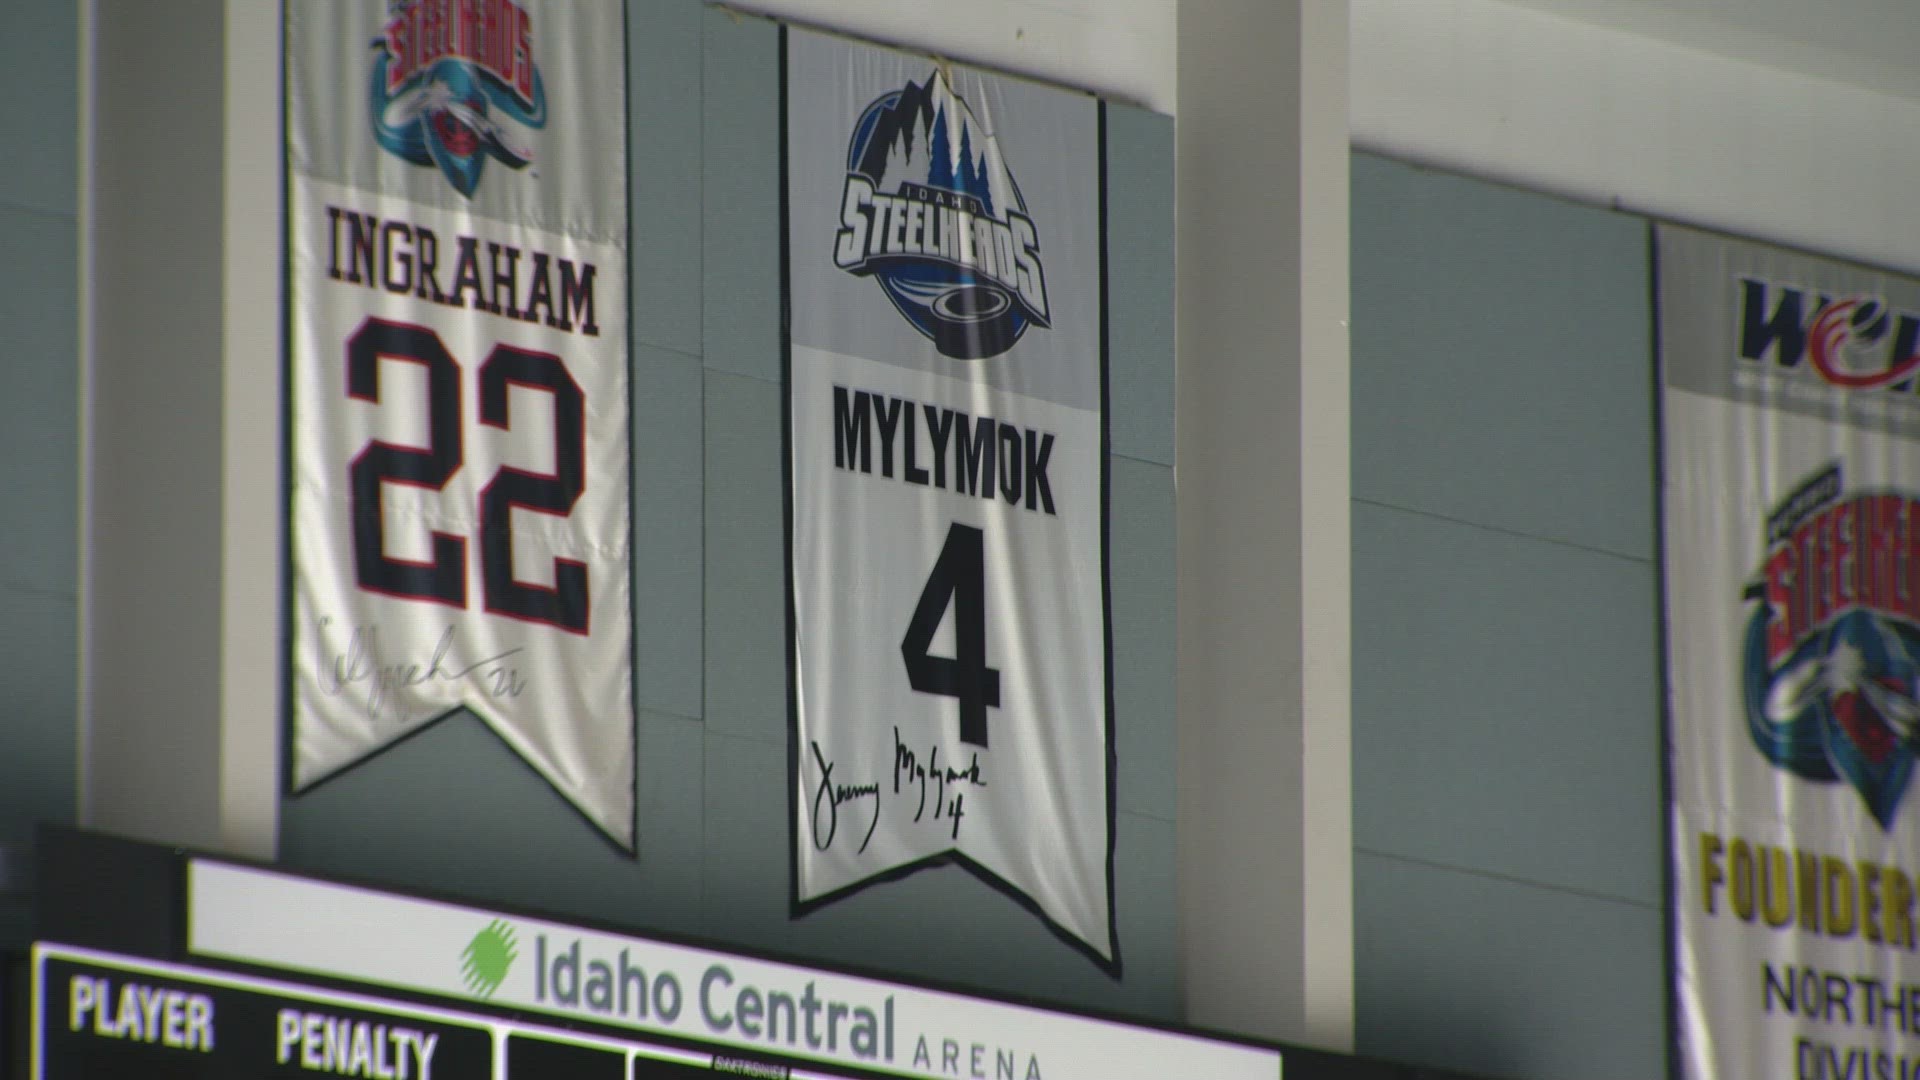 Connor Mylymok, the son of Steelheads legend Jeremy Mylymok, signed with Idaho this week. KTVB's Joe Parris caught up with the father-son duo at Idaho Central Arena.